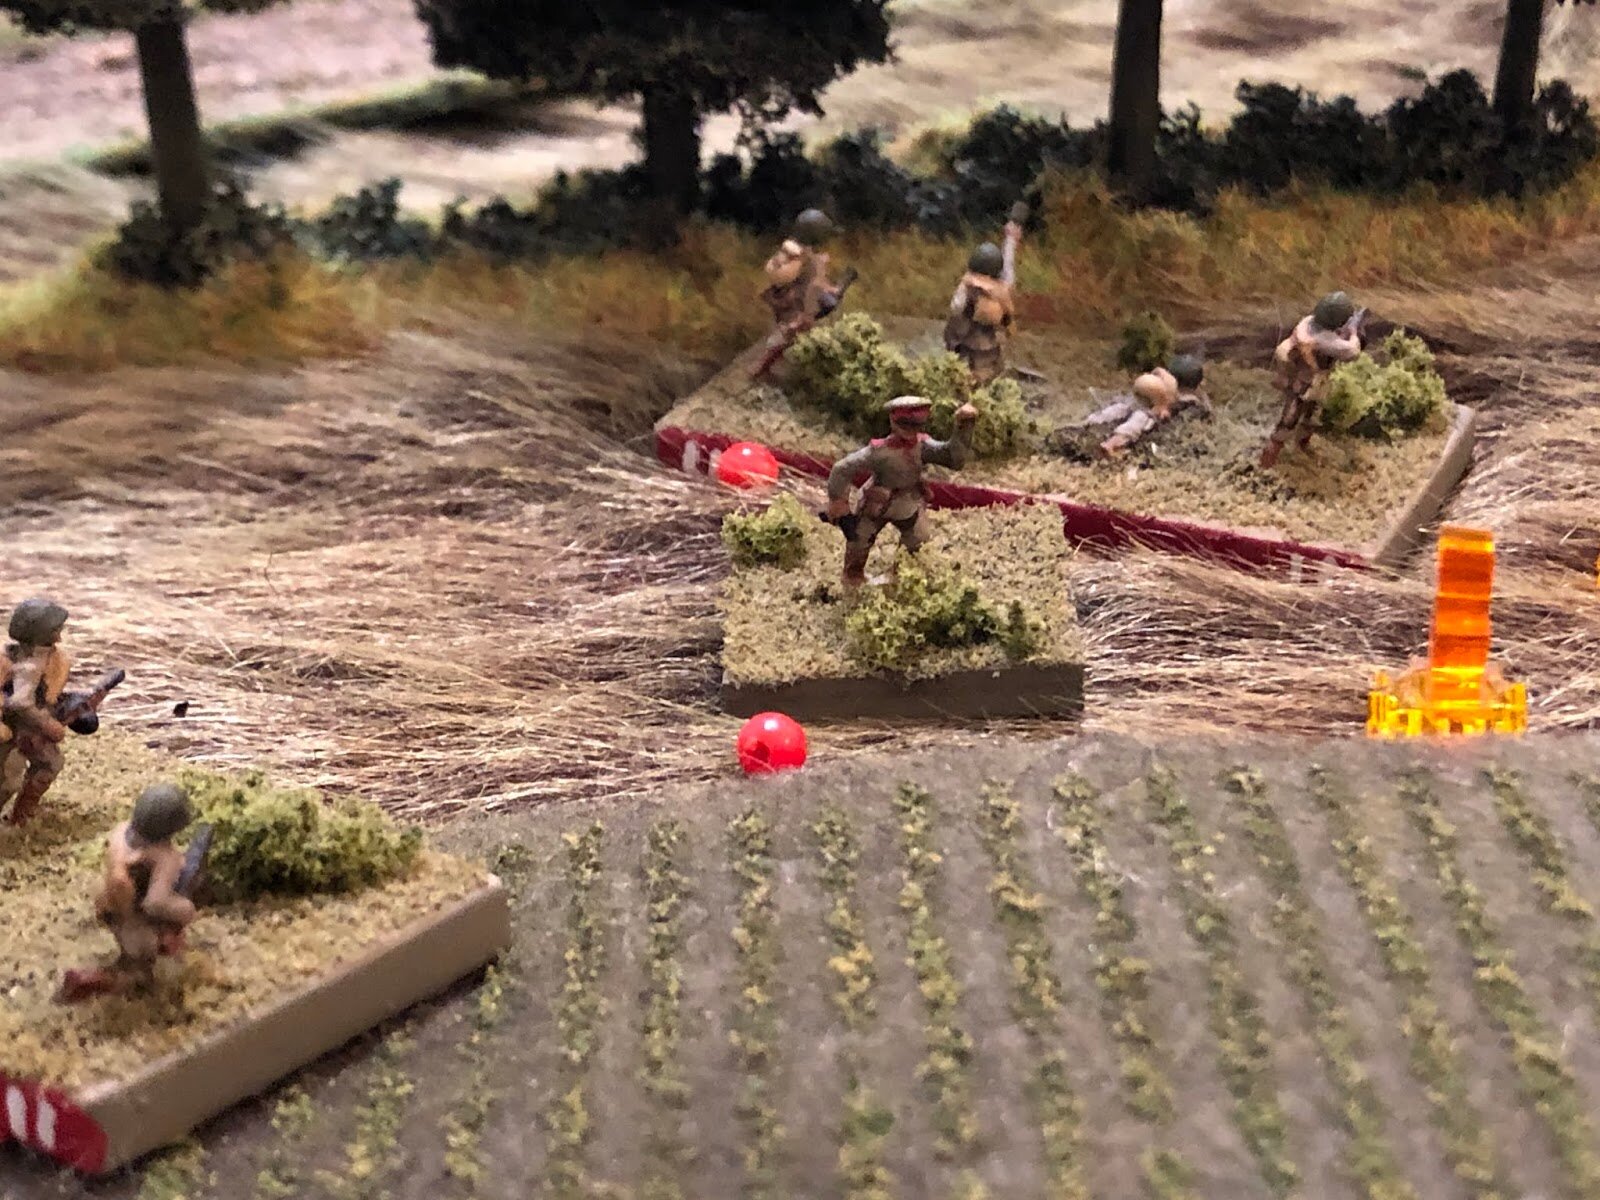  Back in the treeline with the Soviet 2nd Rifle Platoon, their commander rallies, and then he rallies 2nd Squad (the one above him, 3rd is still suppressed at bottom left)! 